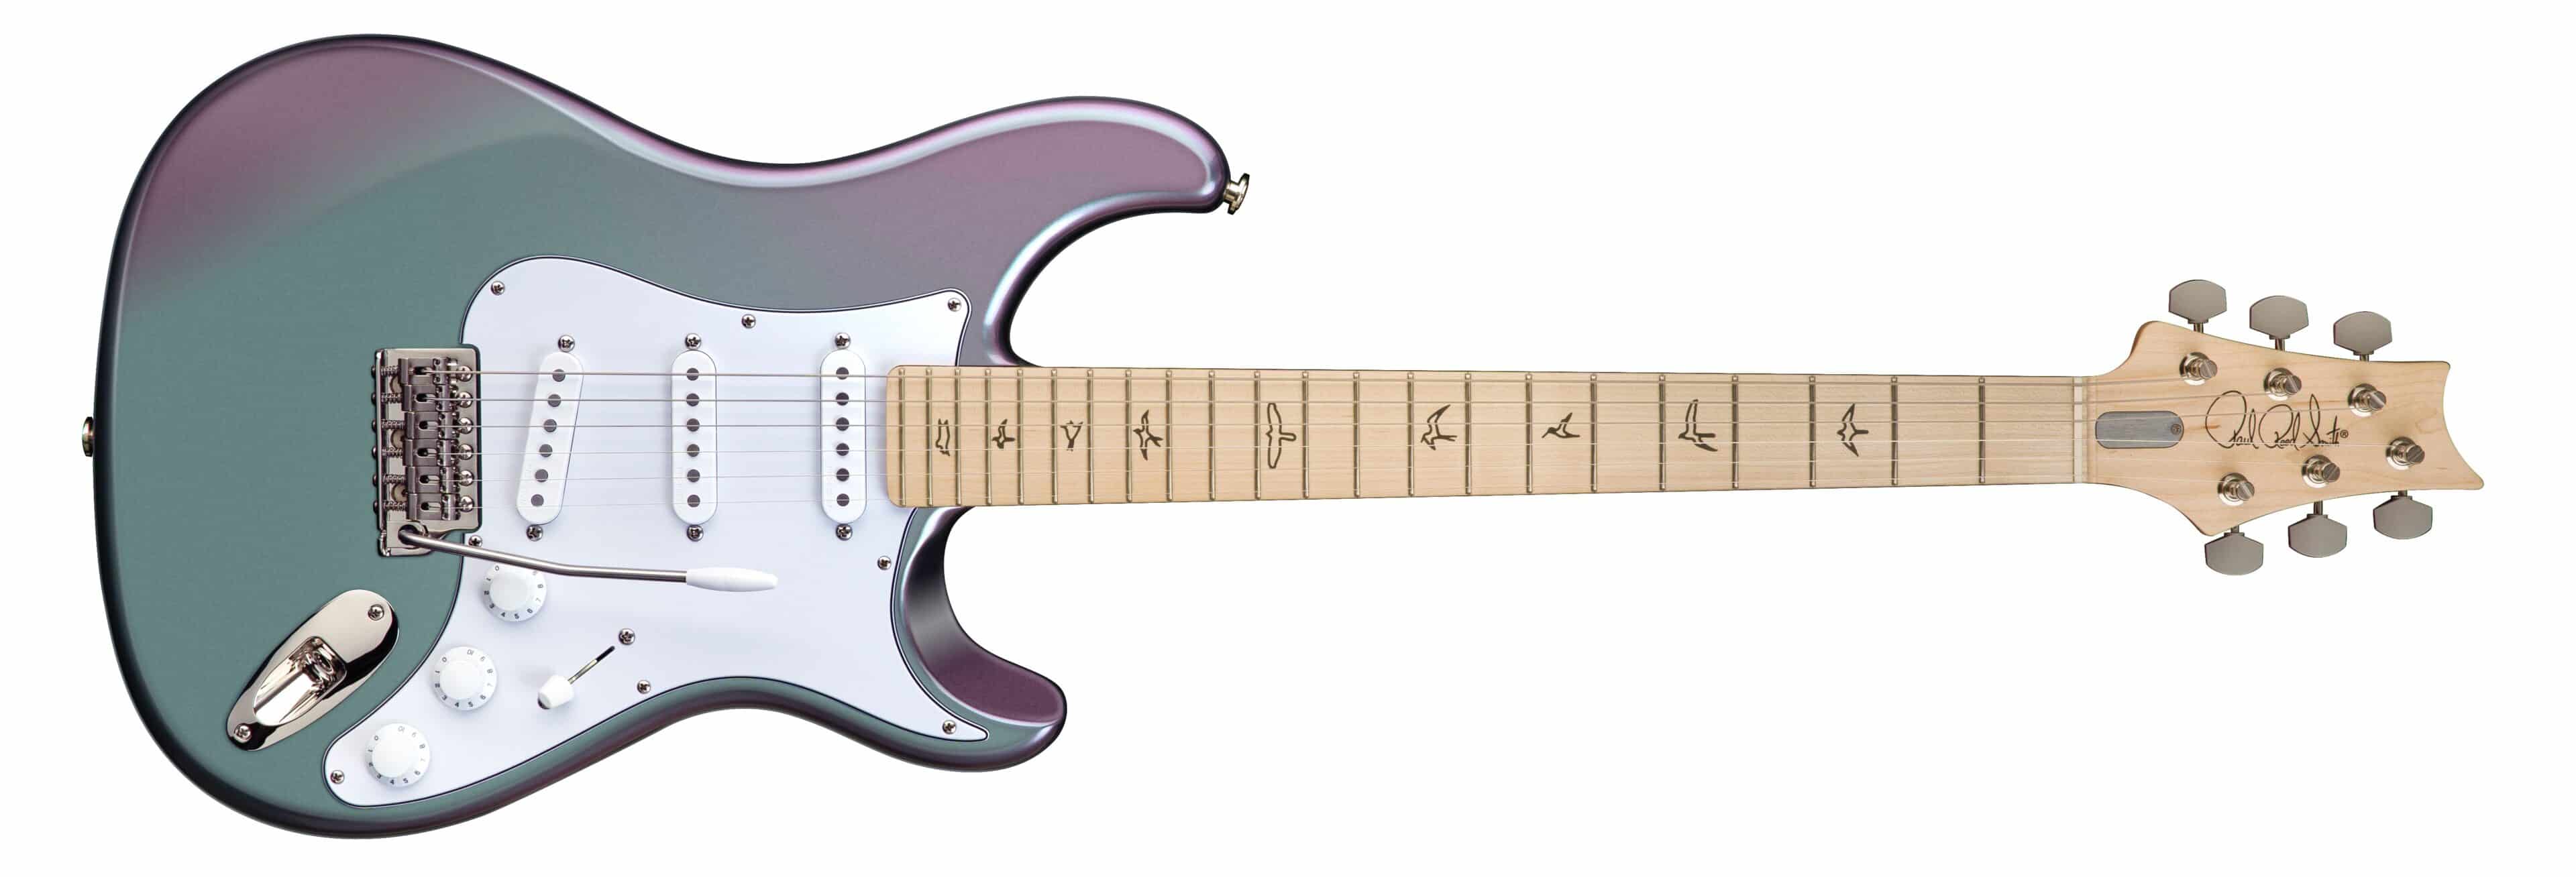 PRS Guitars And John Mayer Announce New Silver Sky Models; Watch Video